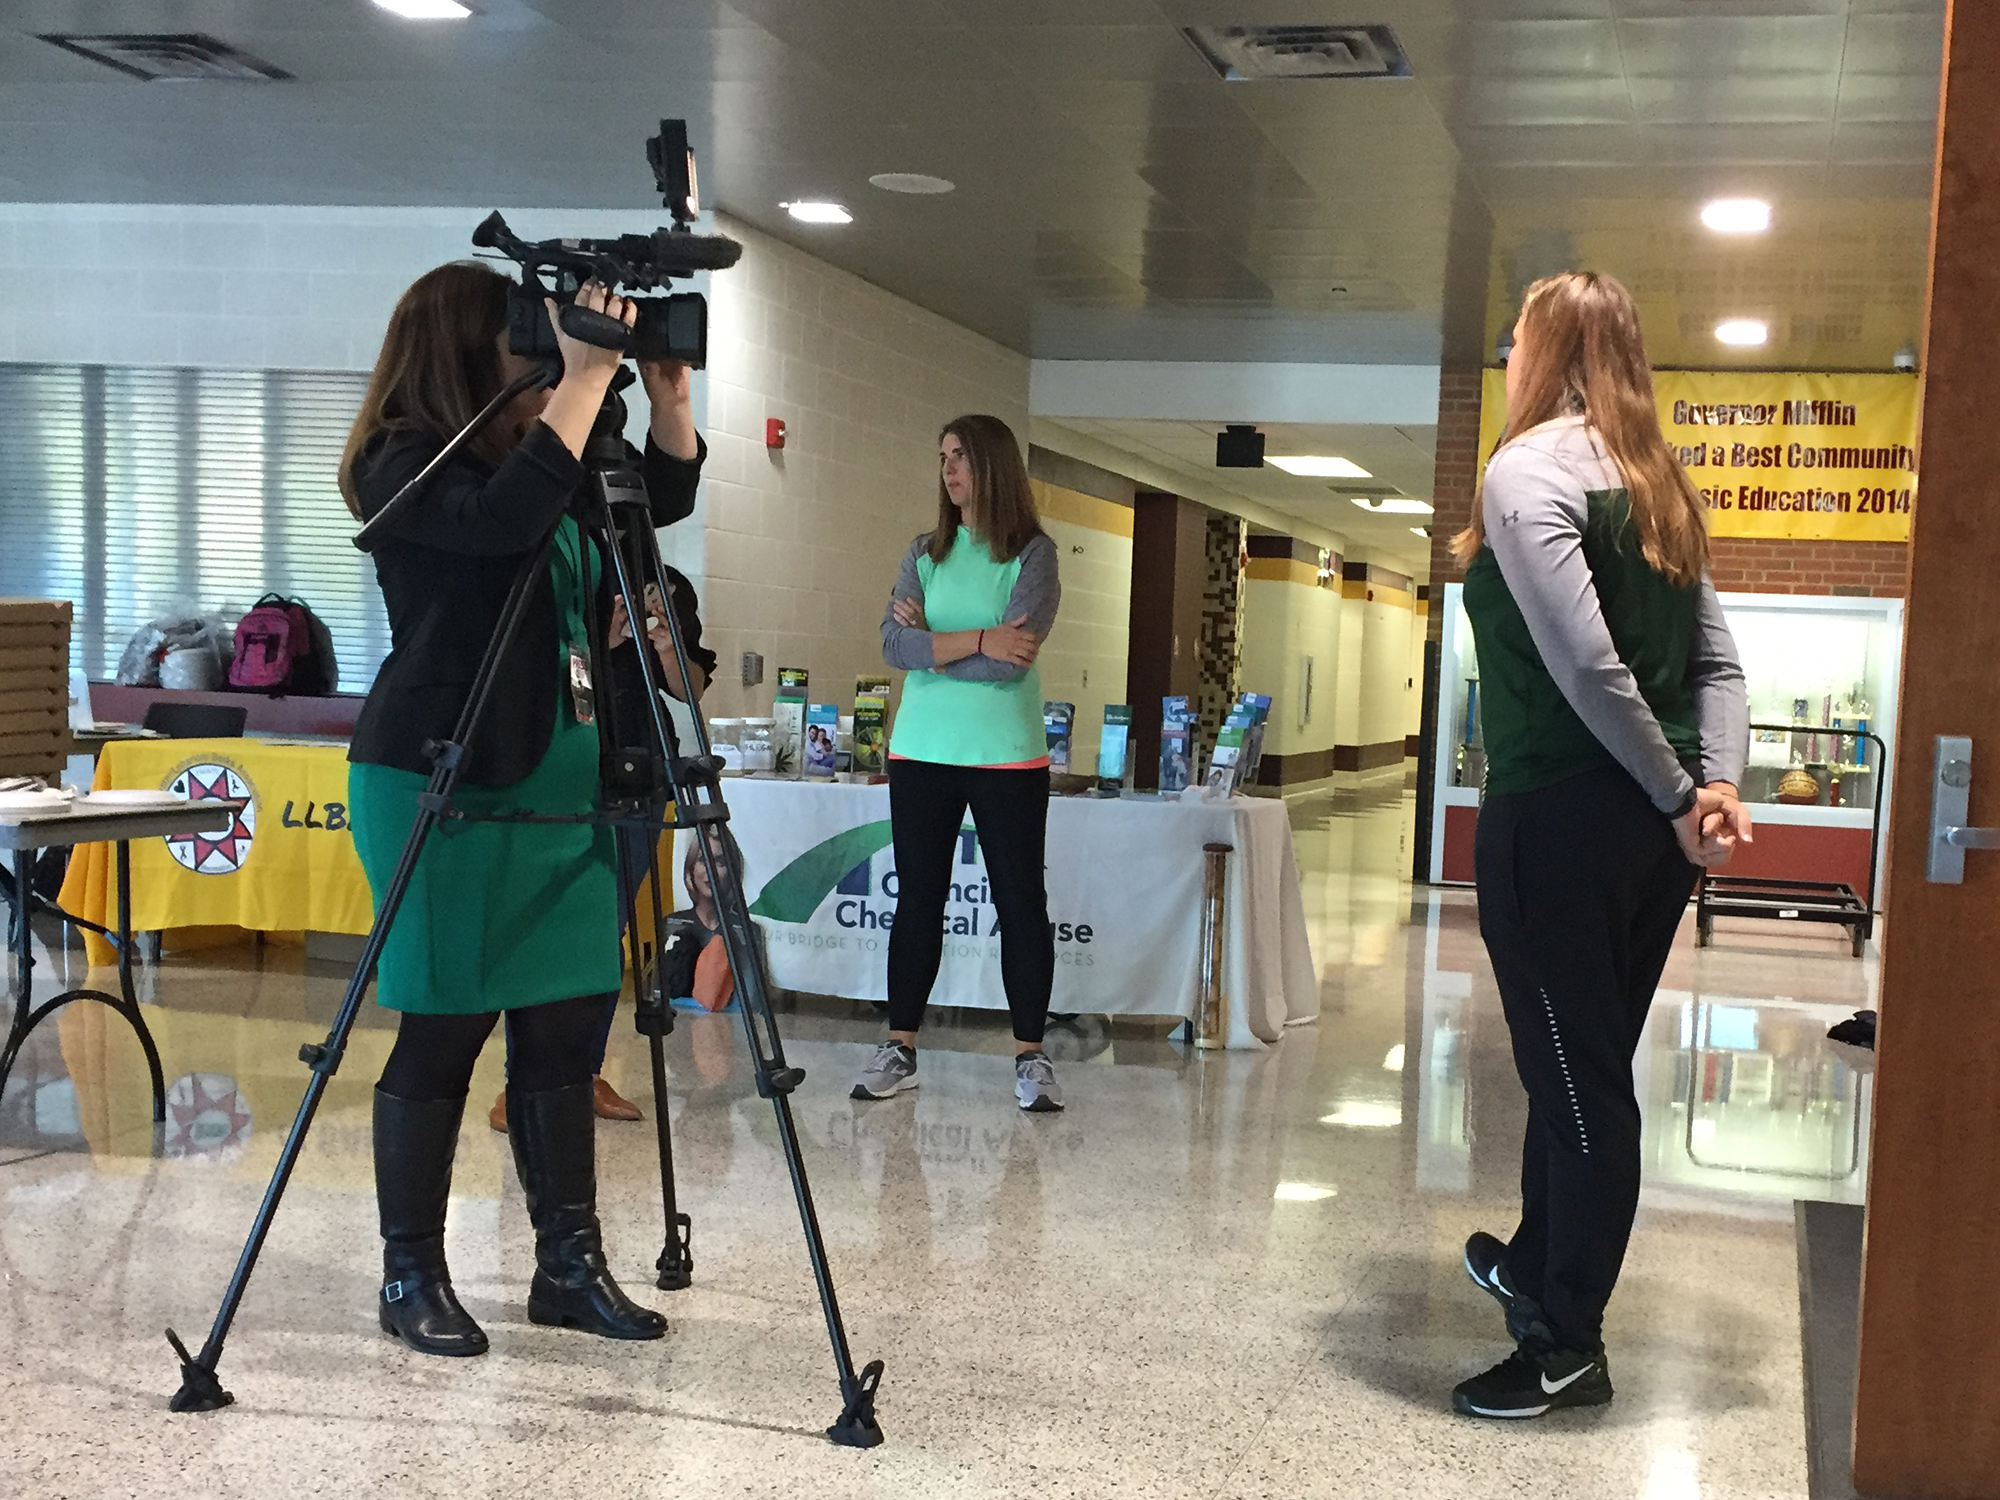 A PBS39 reporter interviewing a teacher at the health and physical education inservice session